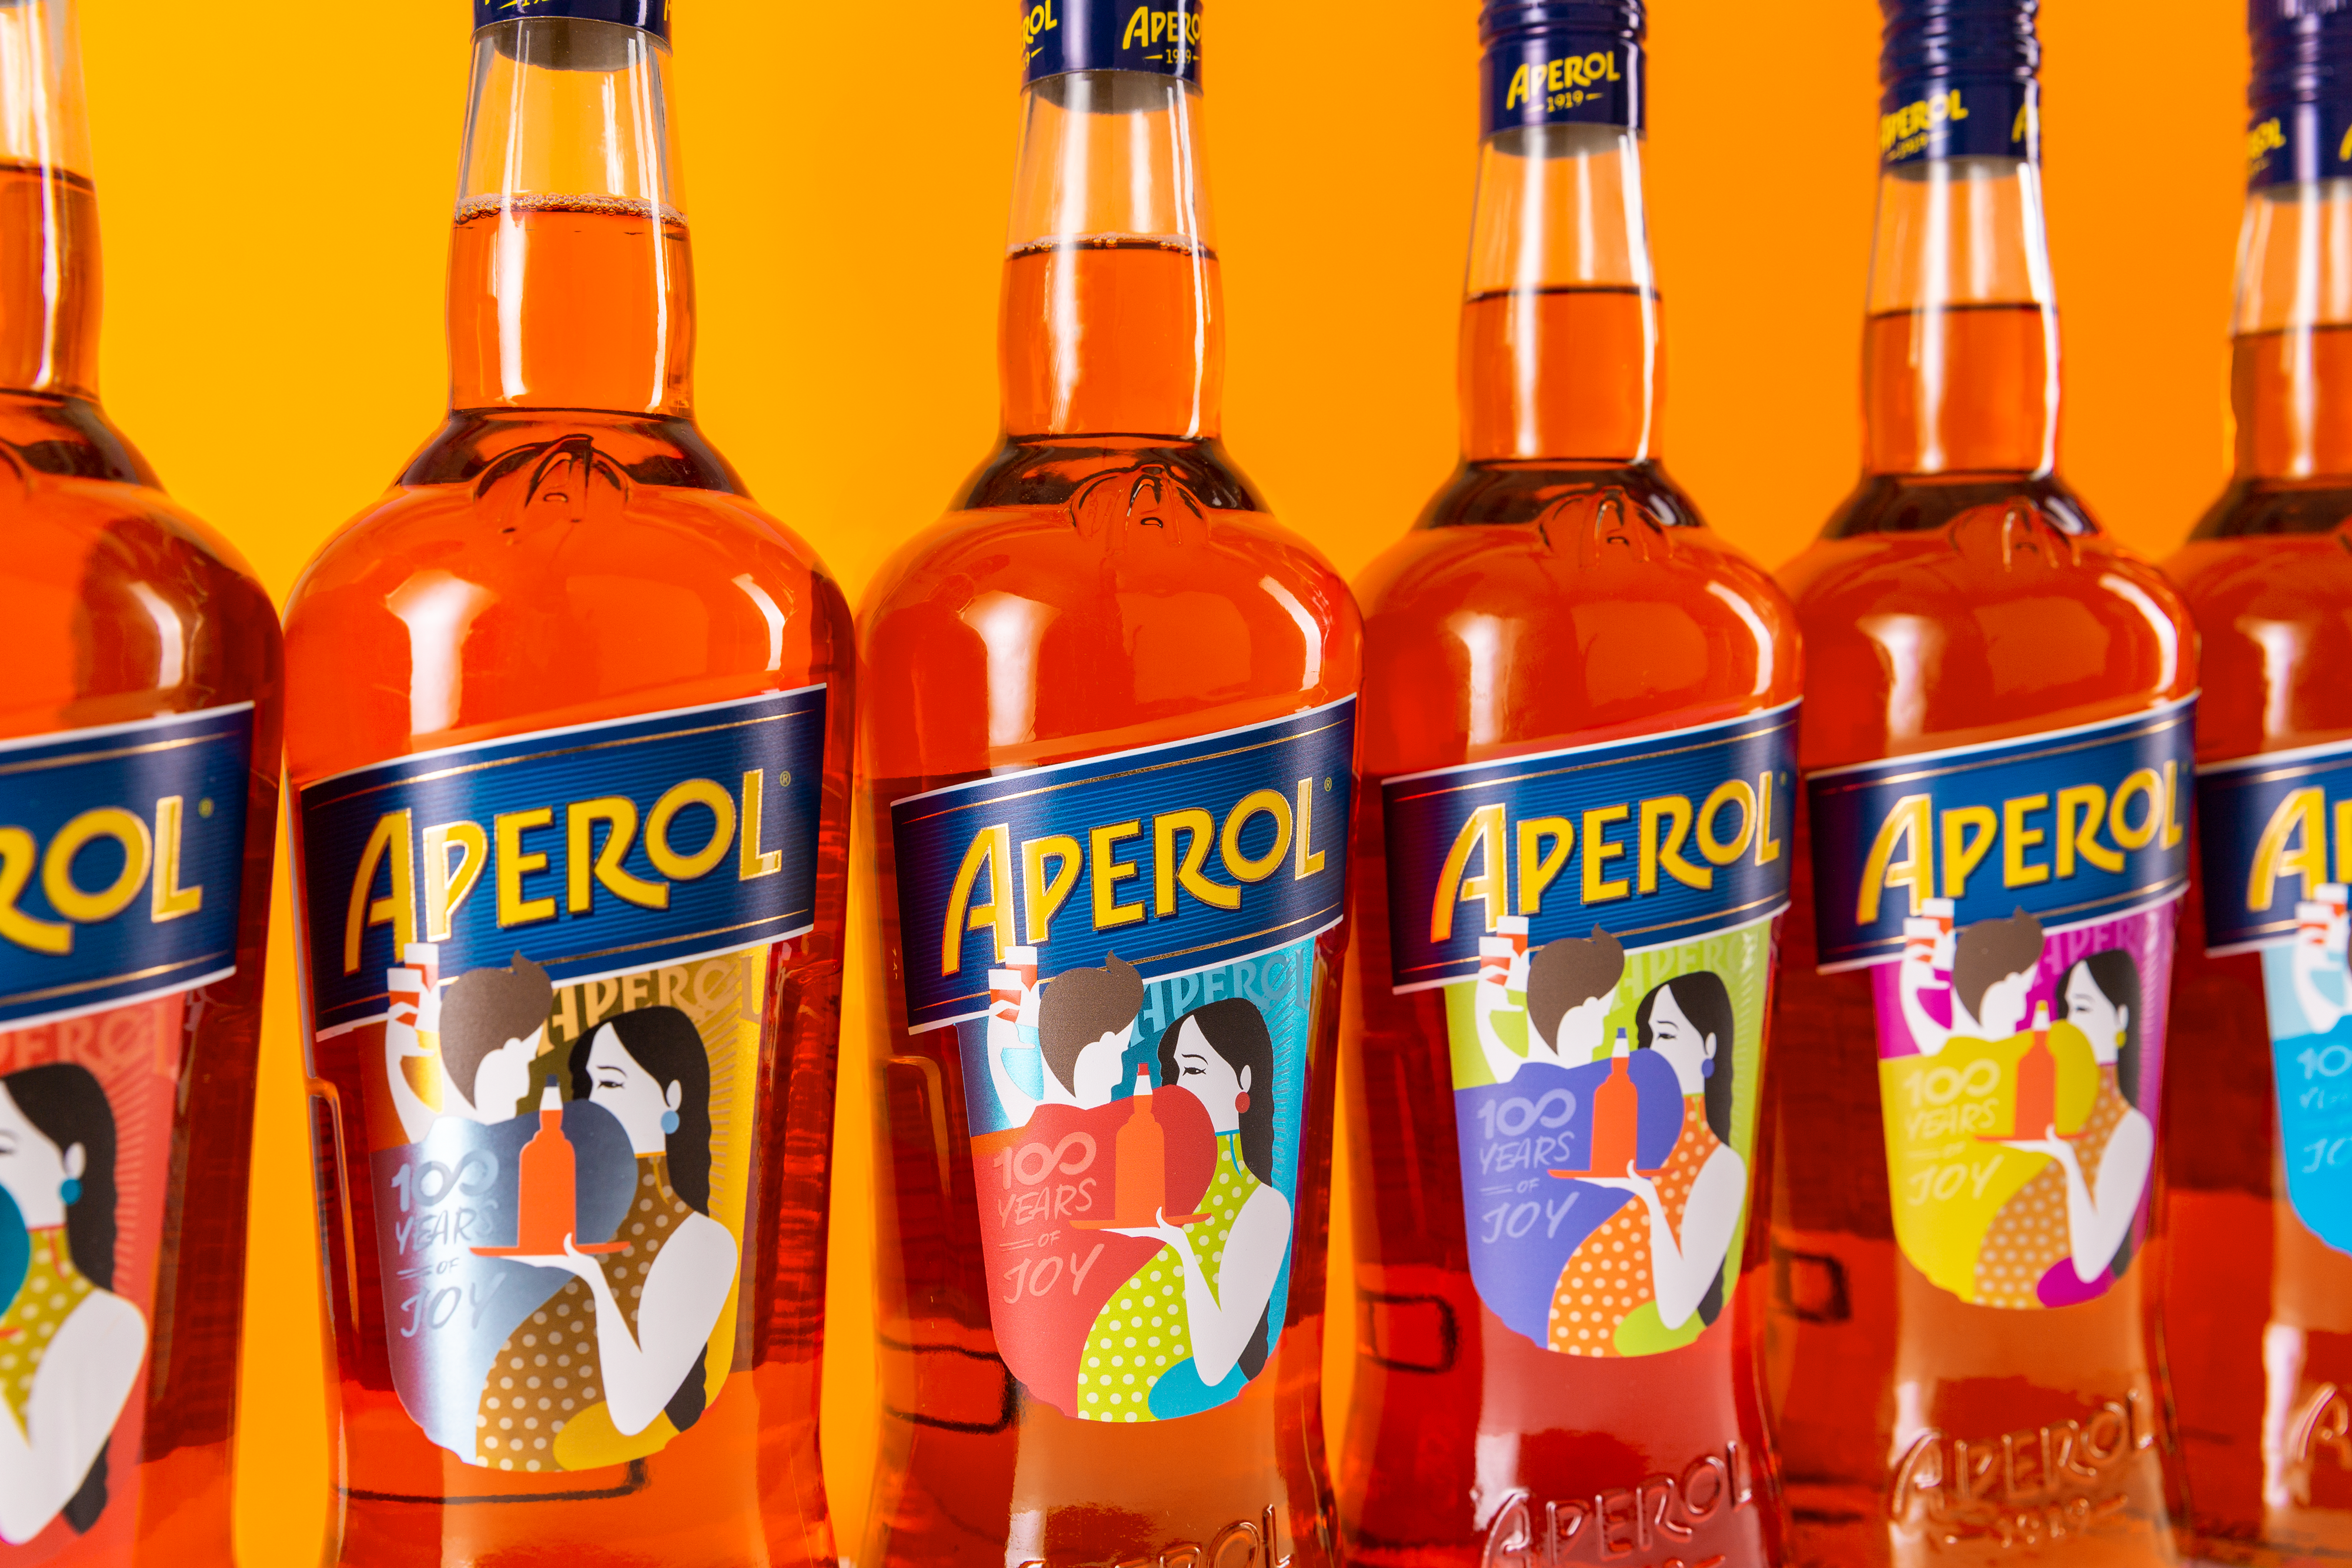 Limited edition Aperol bottles